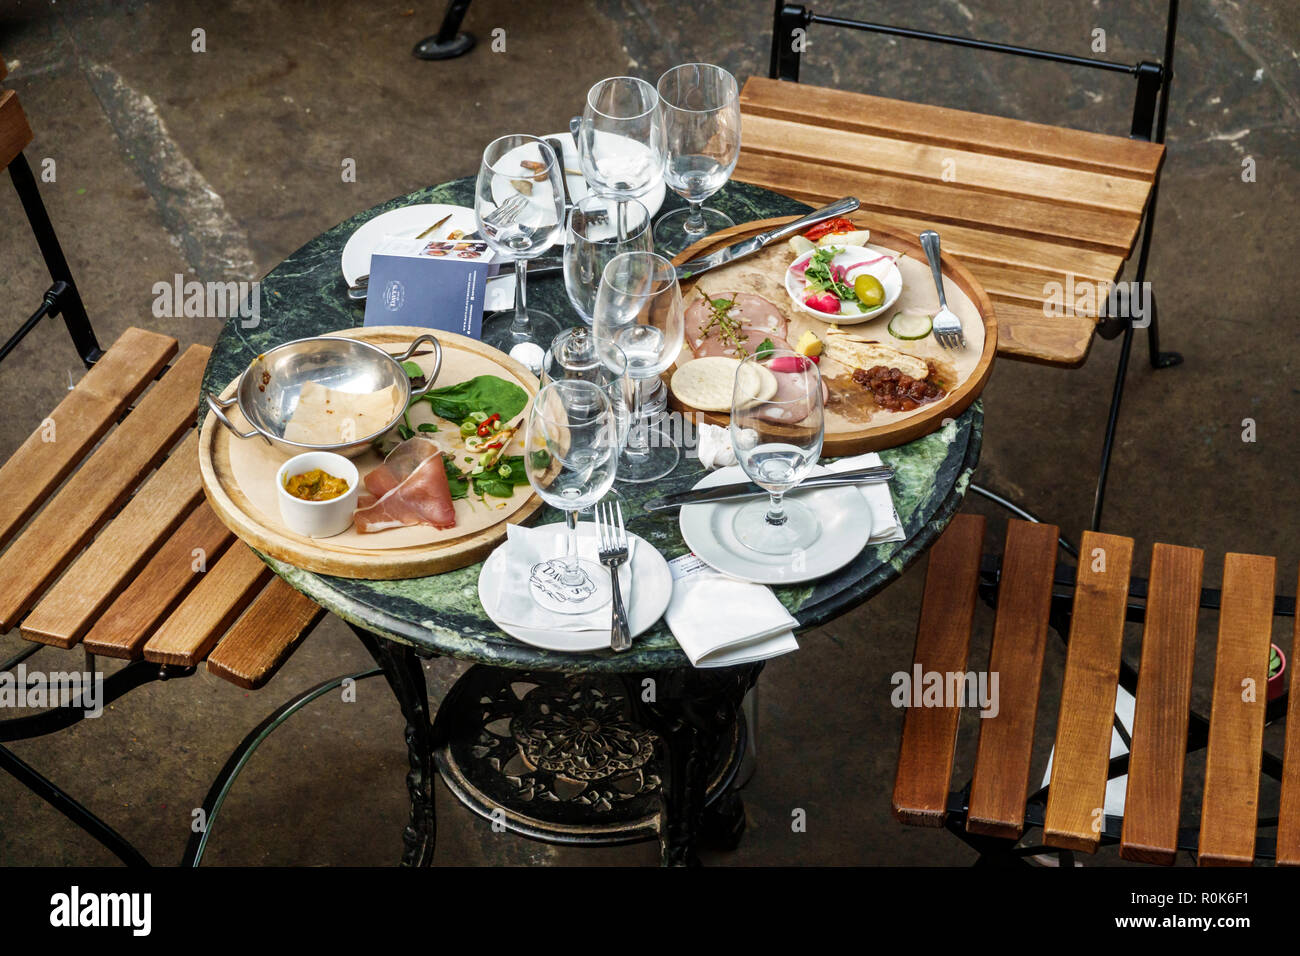 London England,UK,Covent Garden,market,shopping dining entertainment,central hall building,table,finished meal,dirty plates,empty glasses,silverware,l Stock Photo